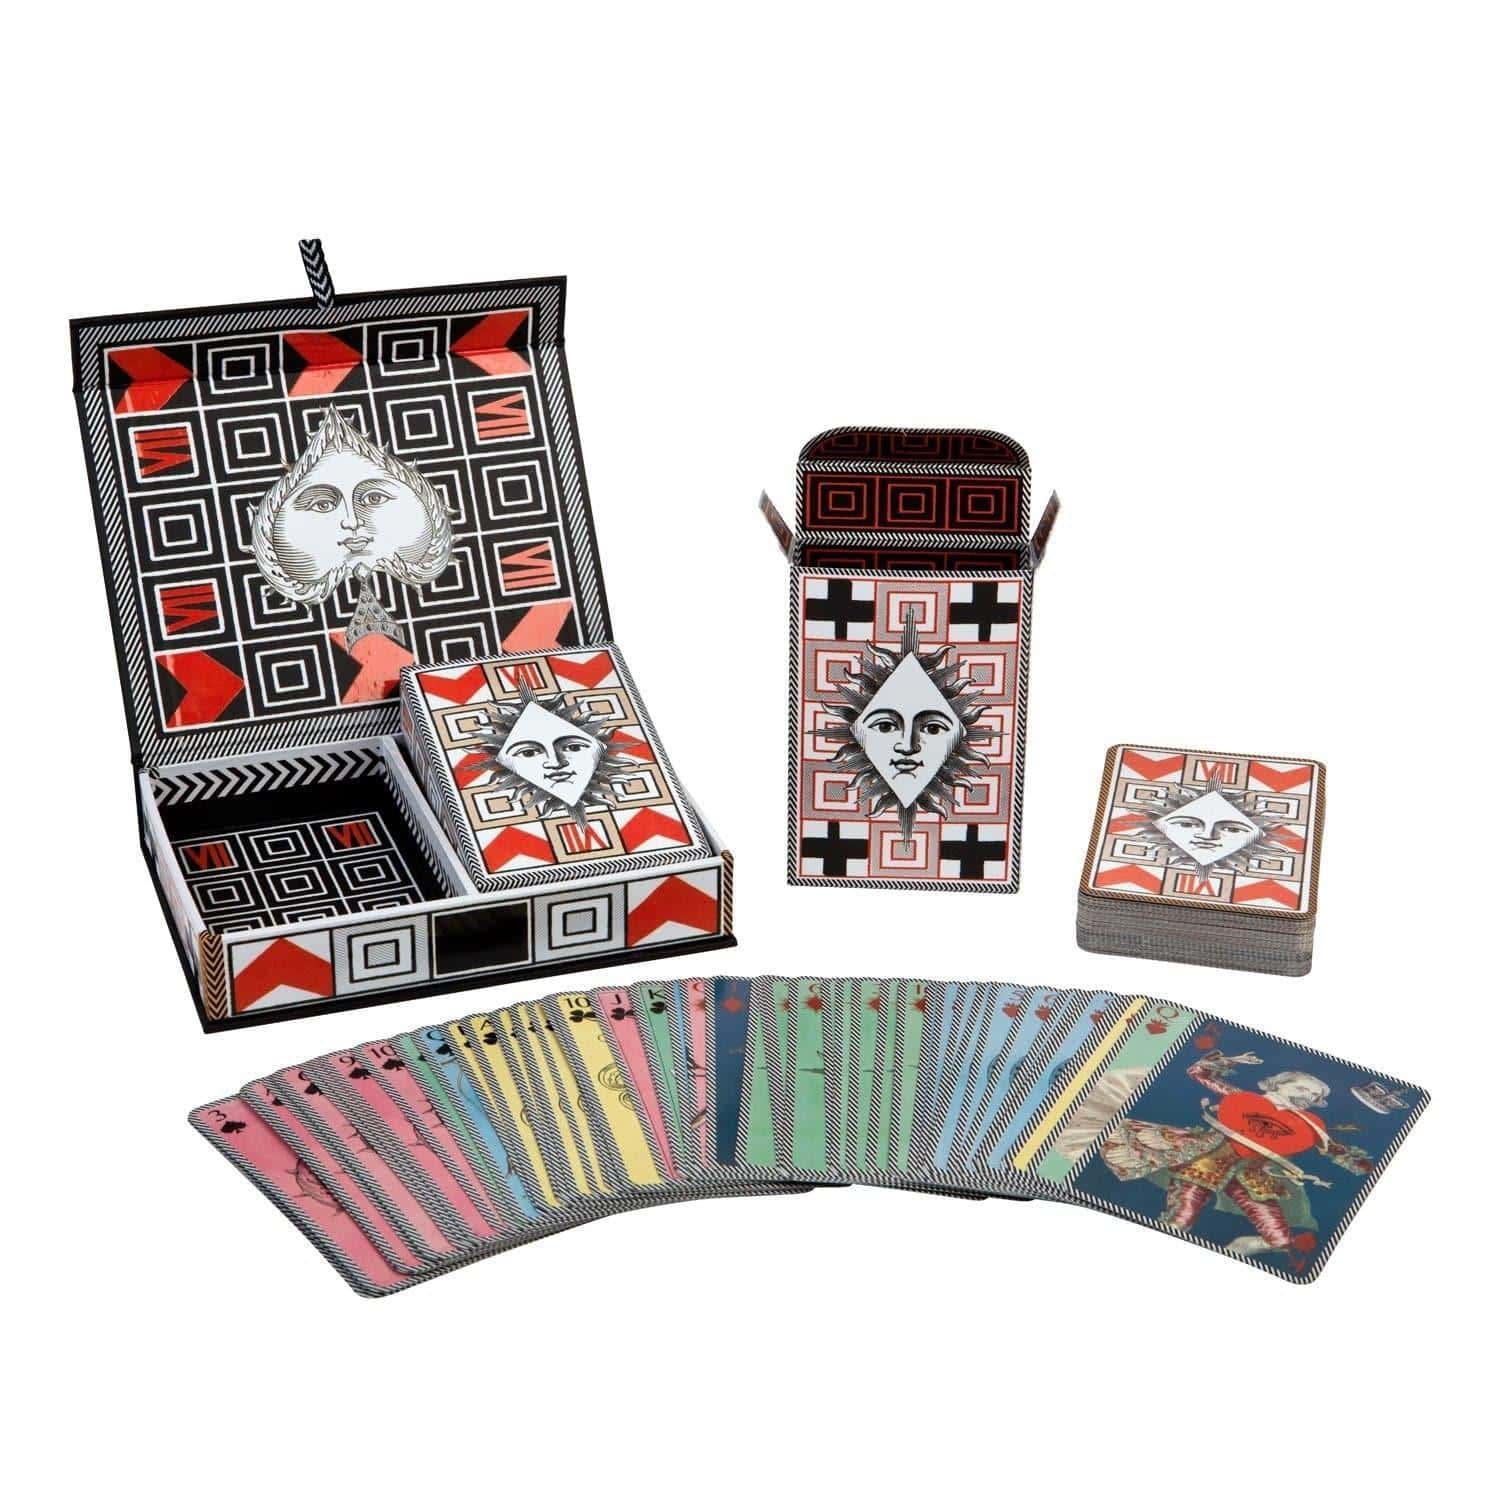 Christian Lacroix Poker Face Playing Cards – 2 Decks 